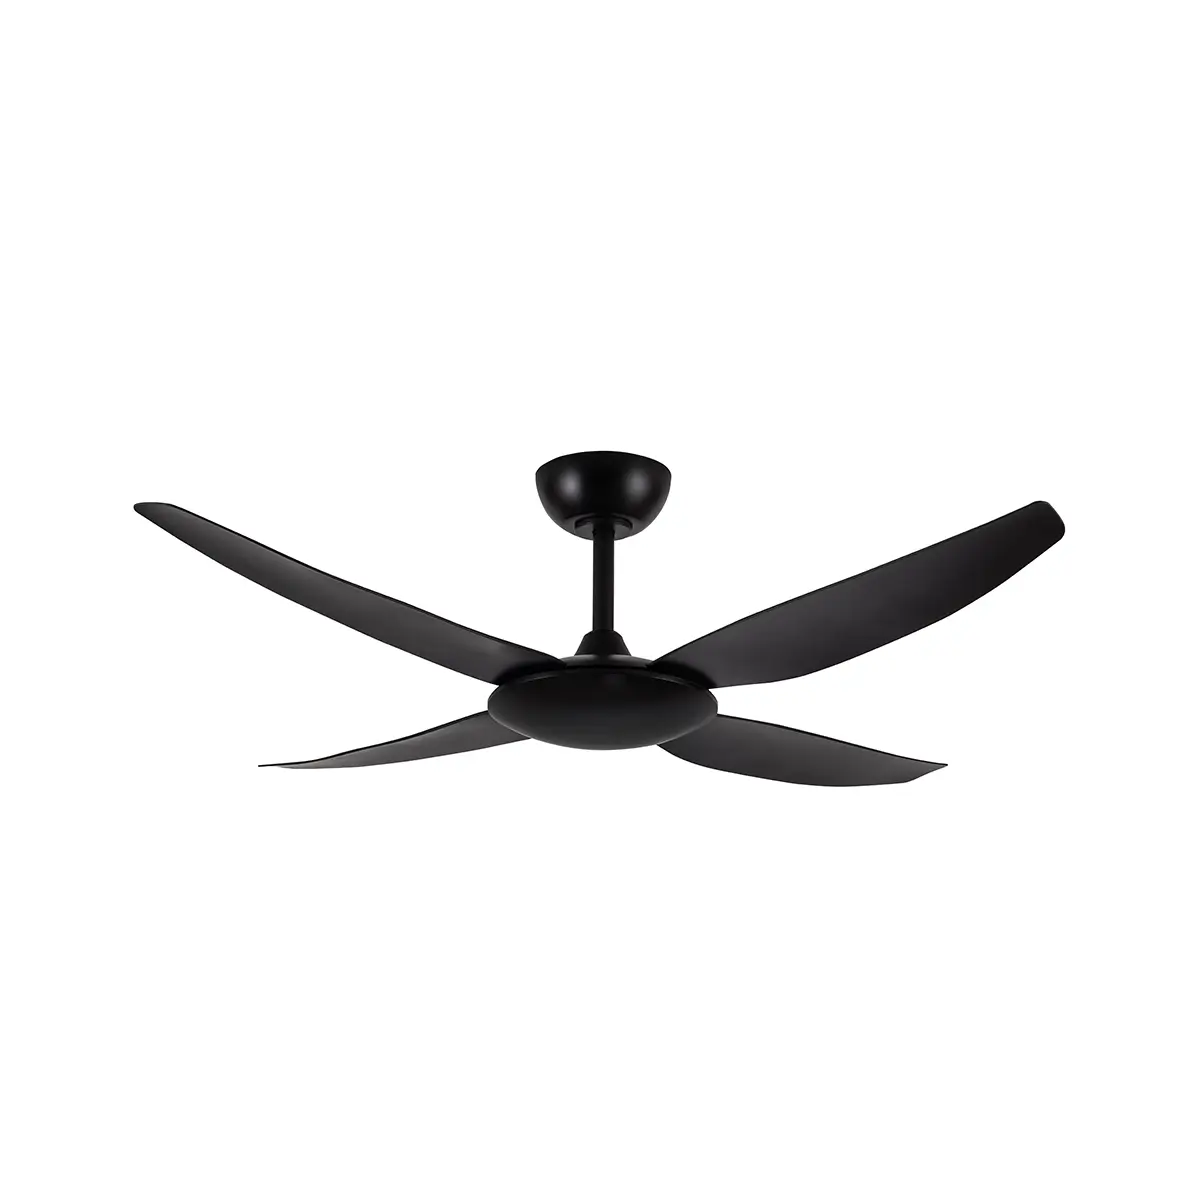 Product image of Amari 52 inch Ceiling Fan in Black